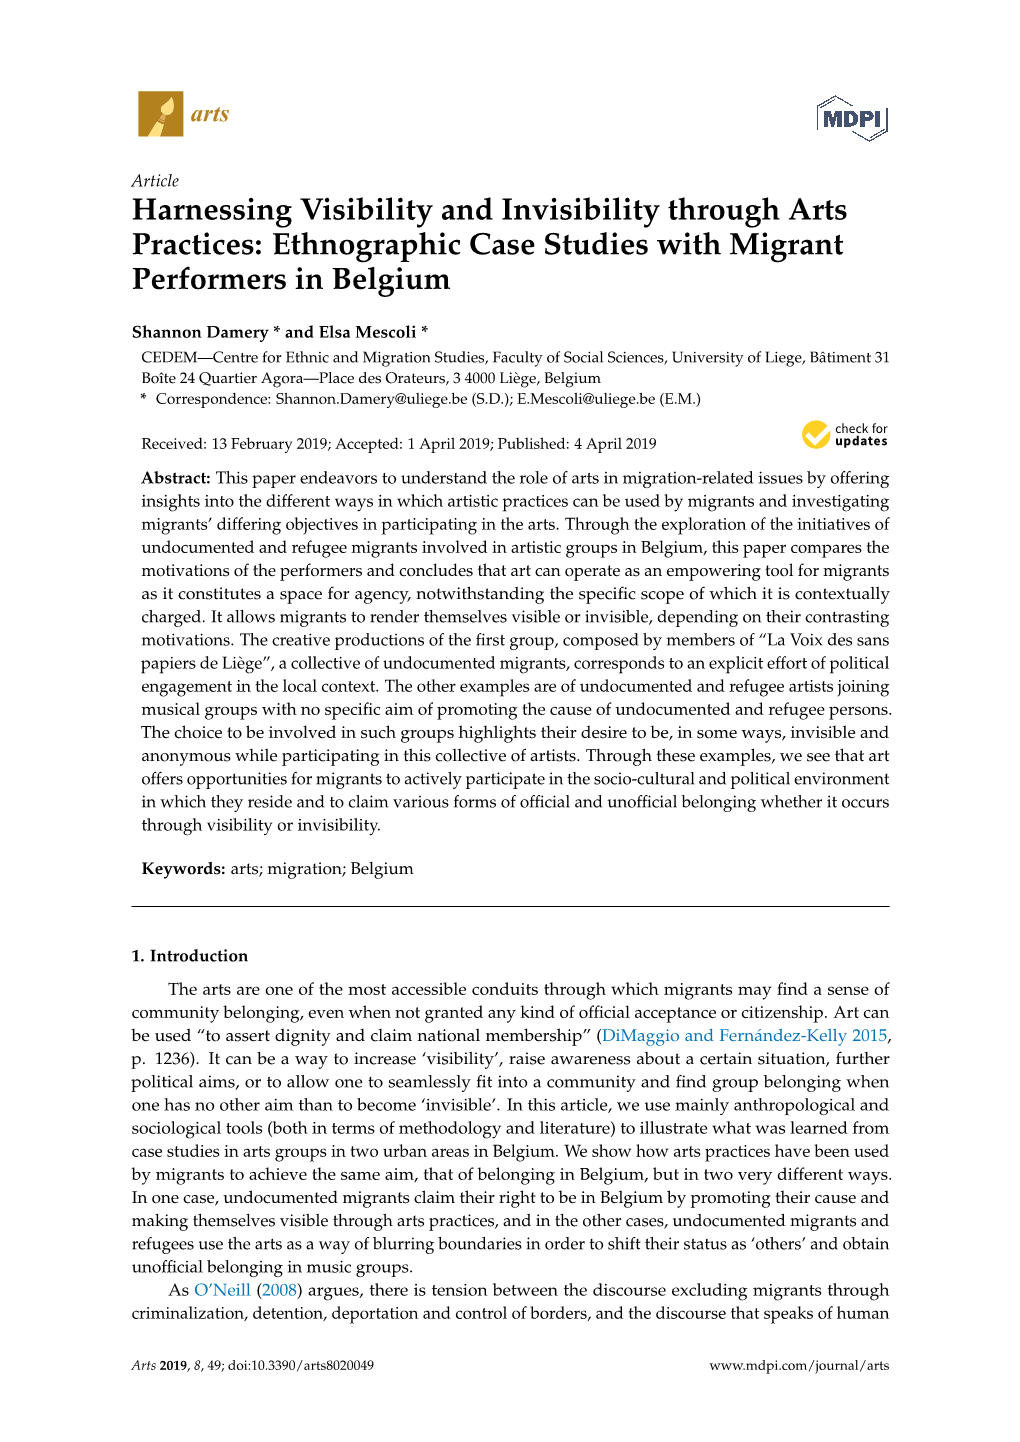 Harnessing Visibility and Invisibility Through Arts Practices: Ethnographic Case Studies with Migrant Performers in Belgium